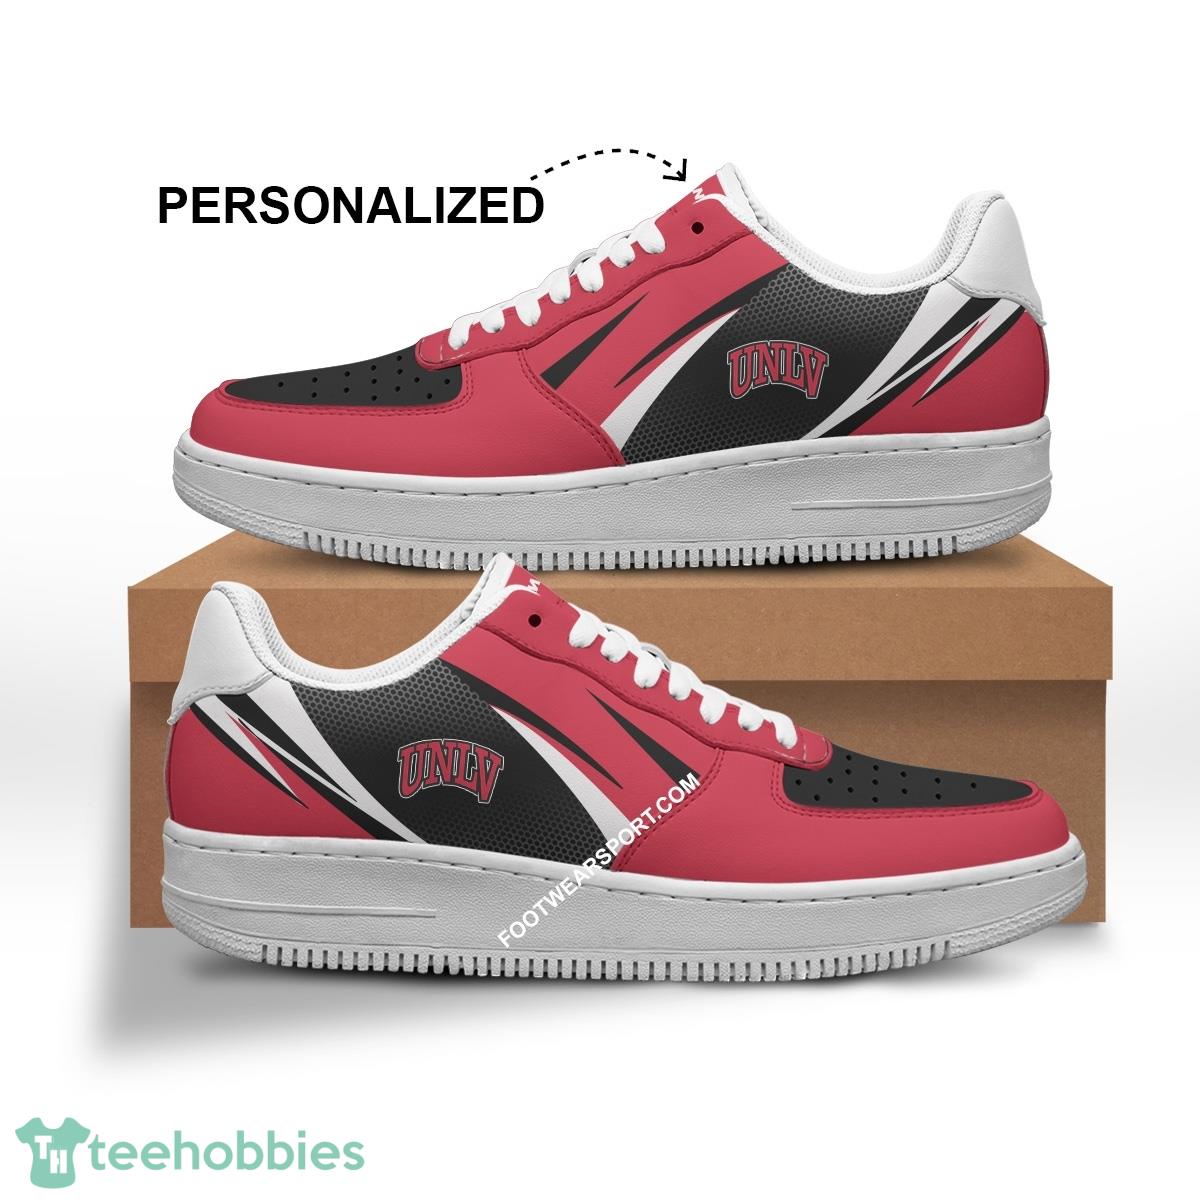 Custom Name UNLV Rebels Air Force 1 Shoes Trending Design Gift For Men Women Fans - NCAA UNLV Rebels Air Force 1 Shoes Personalized Style 1